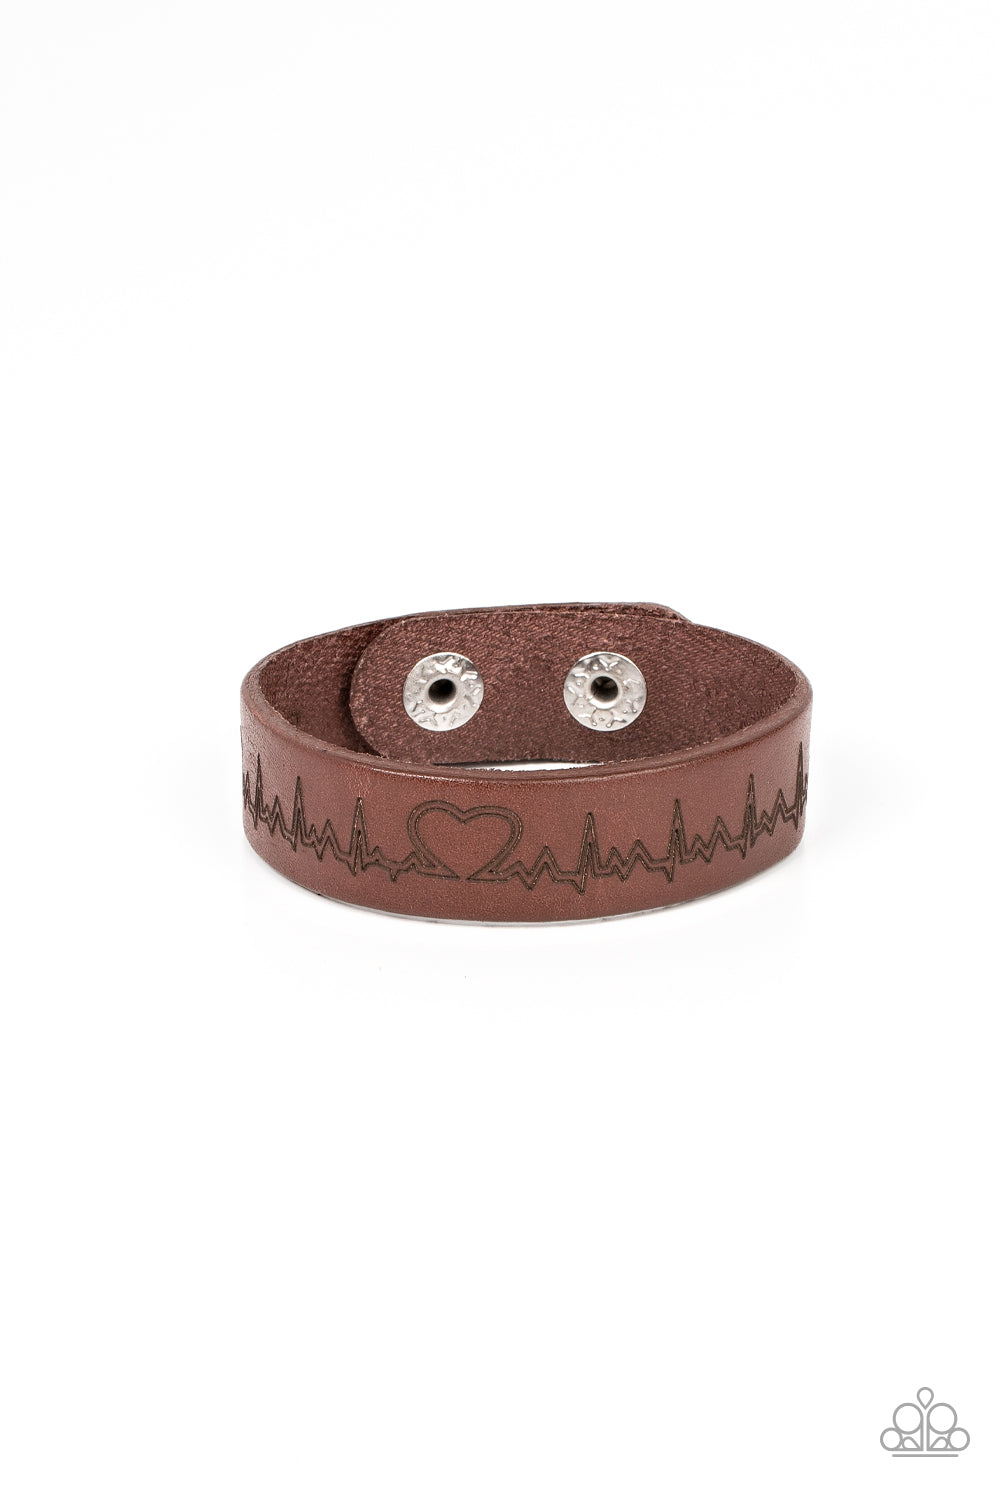 Haute Heartbeat Brown Wrap Bracelet - Paparazzi Accessories  Culminating into a heart at the center, a zigzagging pattern reminiscent of a heartbeat is etched across the front of a brown leather band around the wrist for a whimsical fashion. Features an adjustable snap closure.  Sold as one individual bracelet.